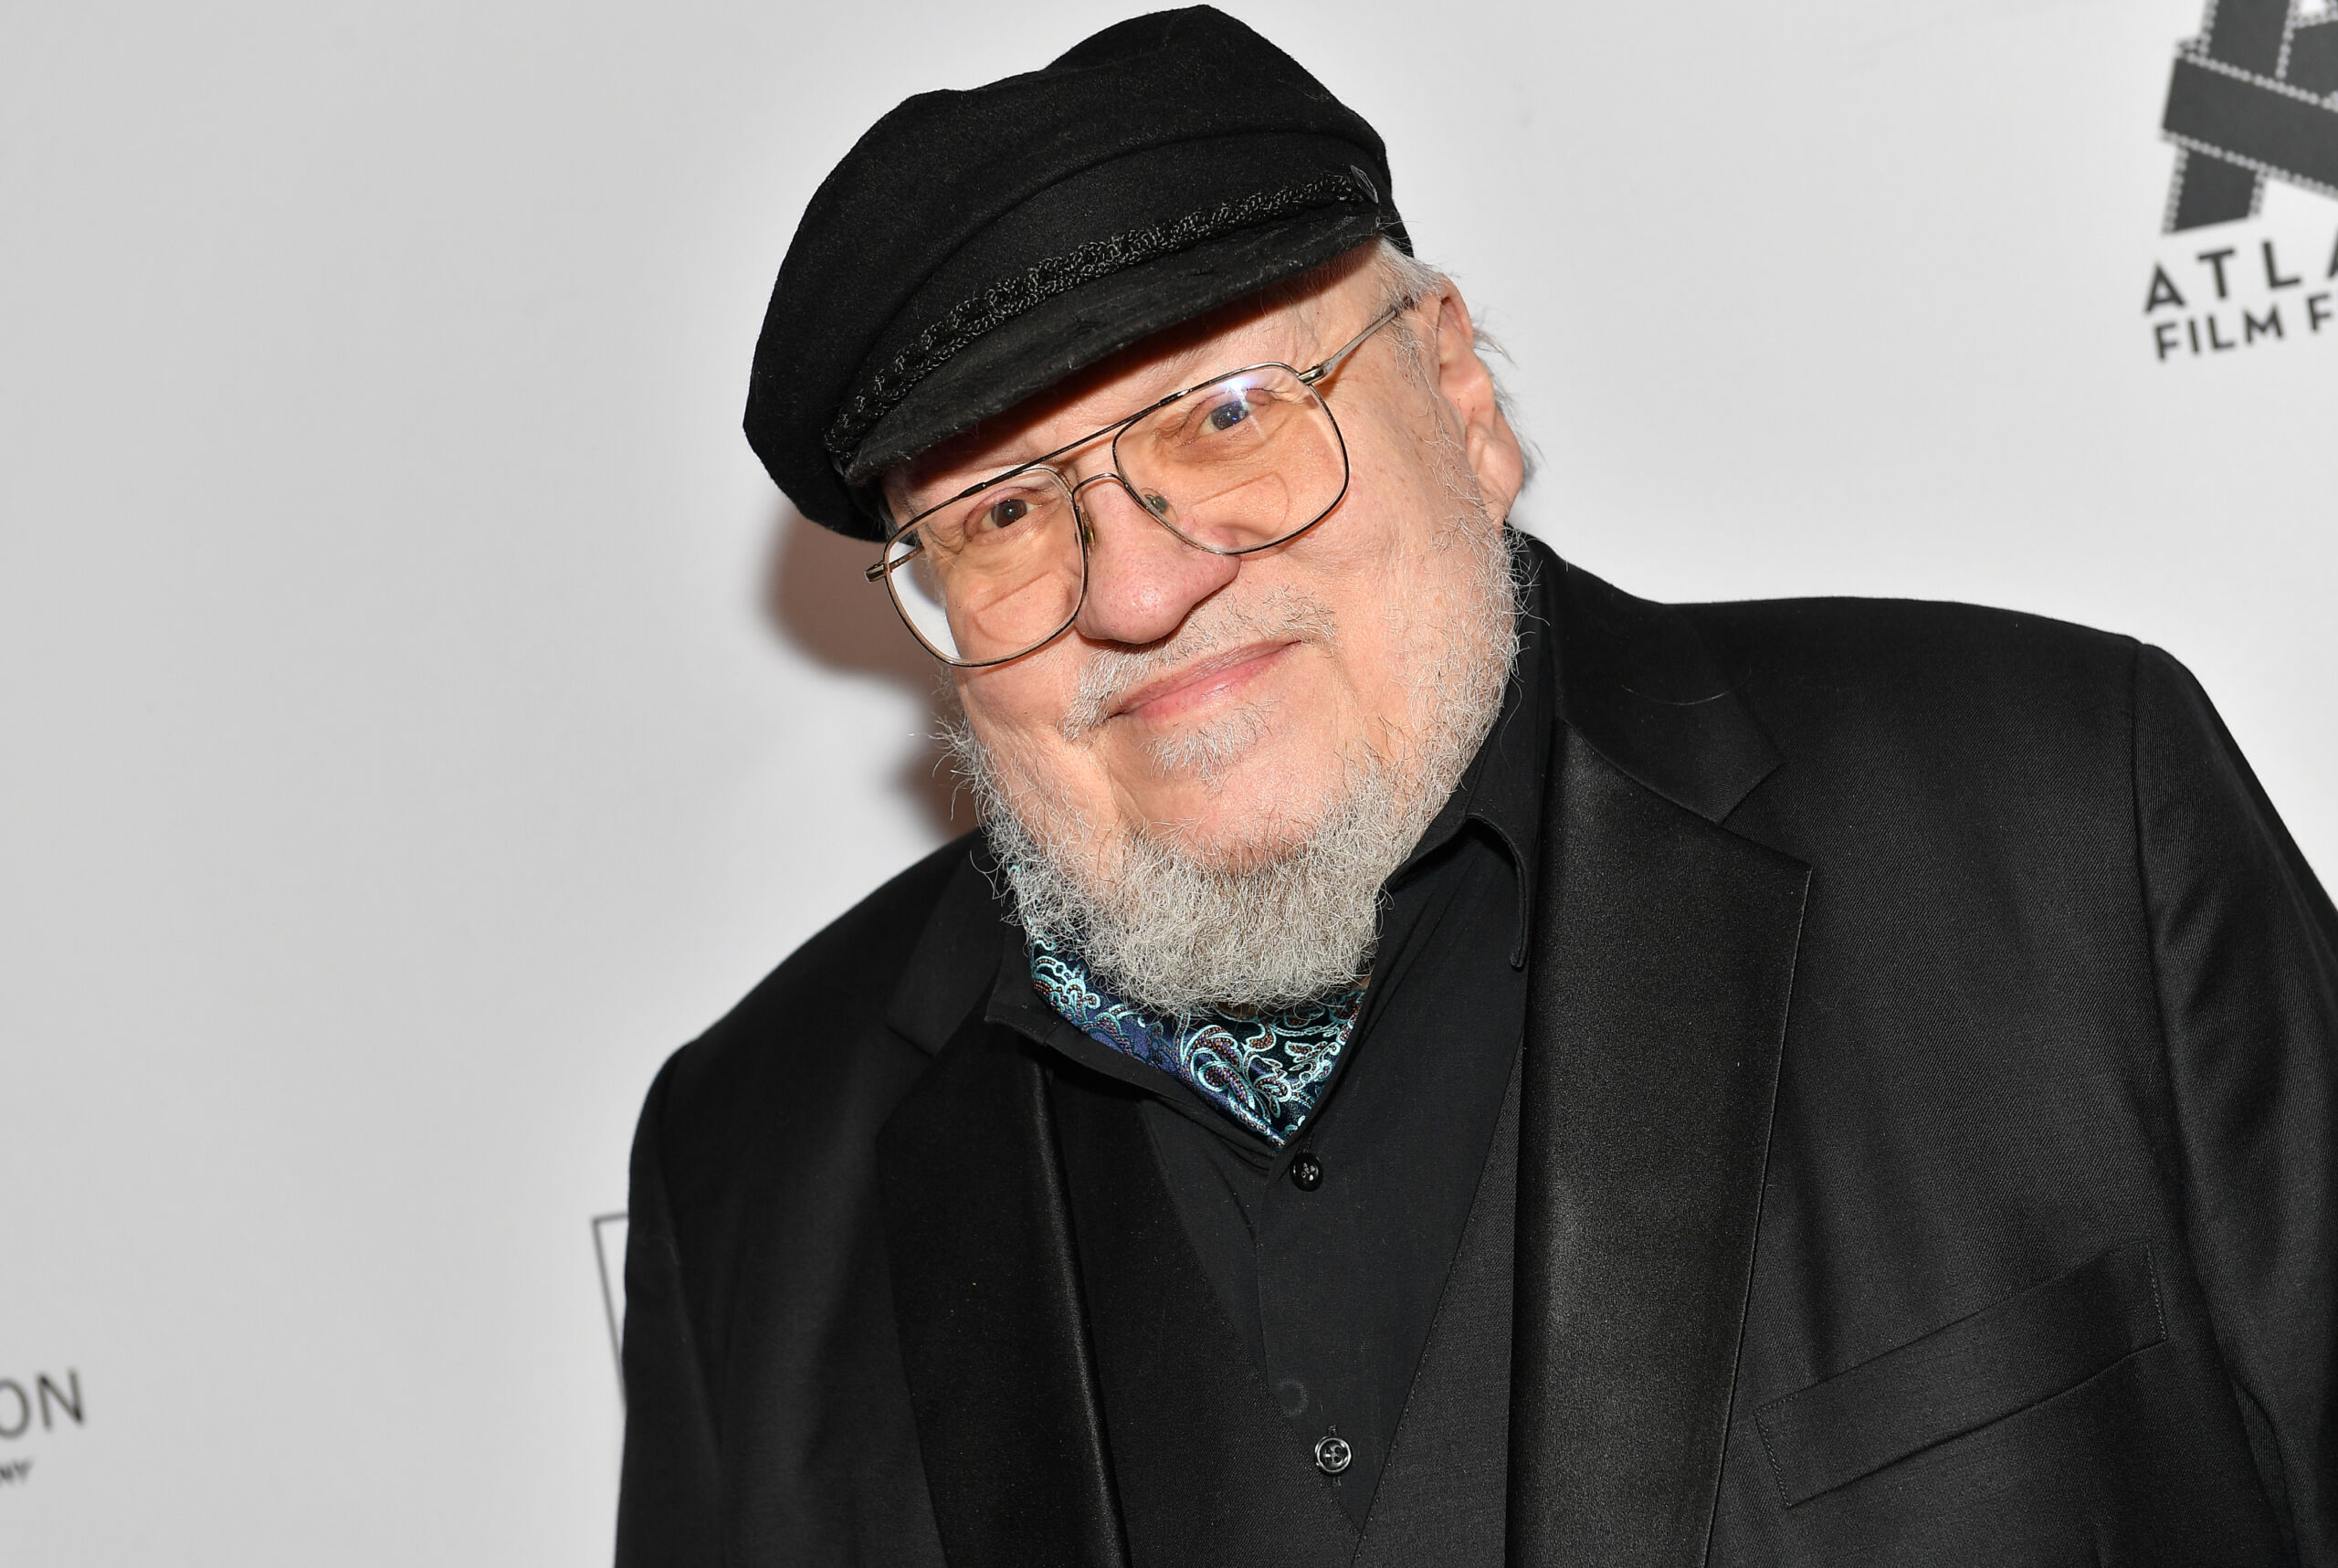 Report: George R.R. Martin Is Making A New Game With The